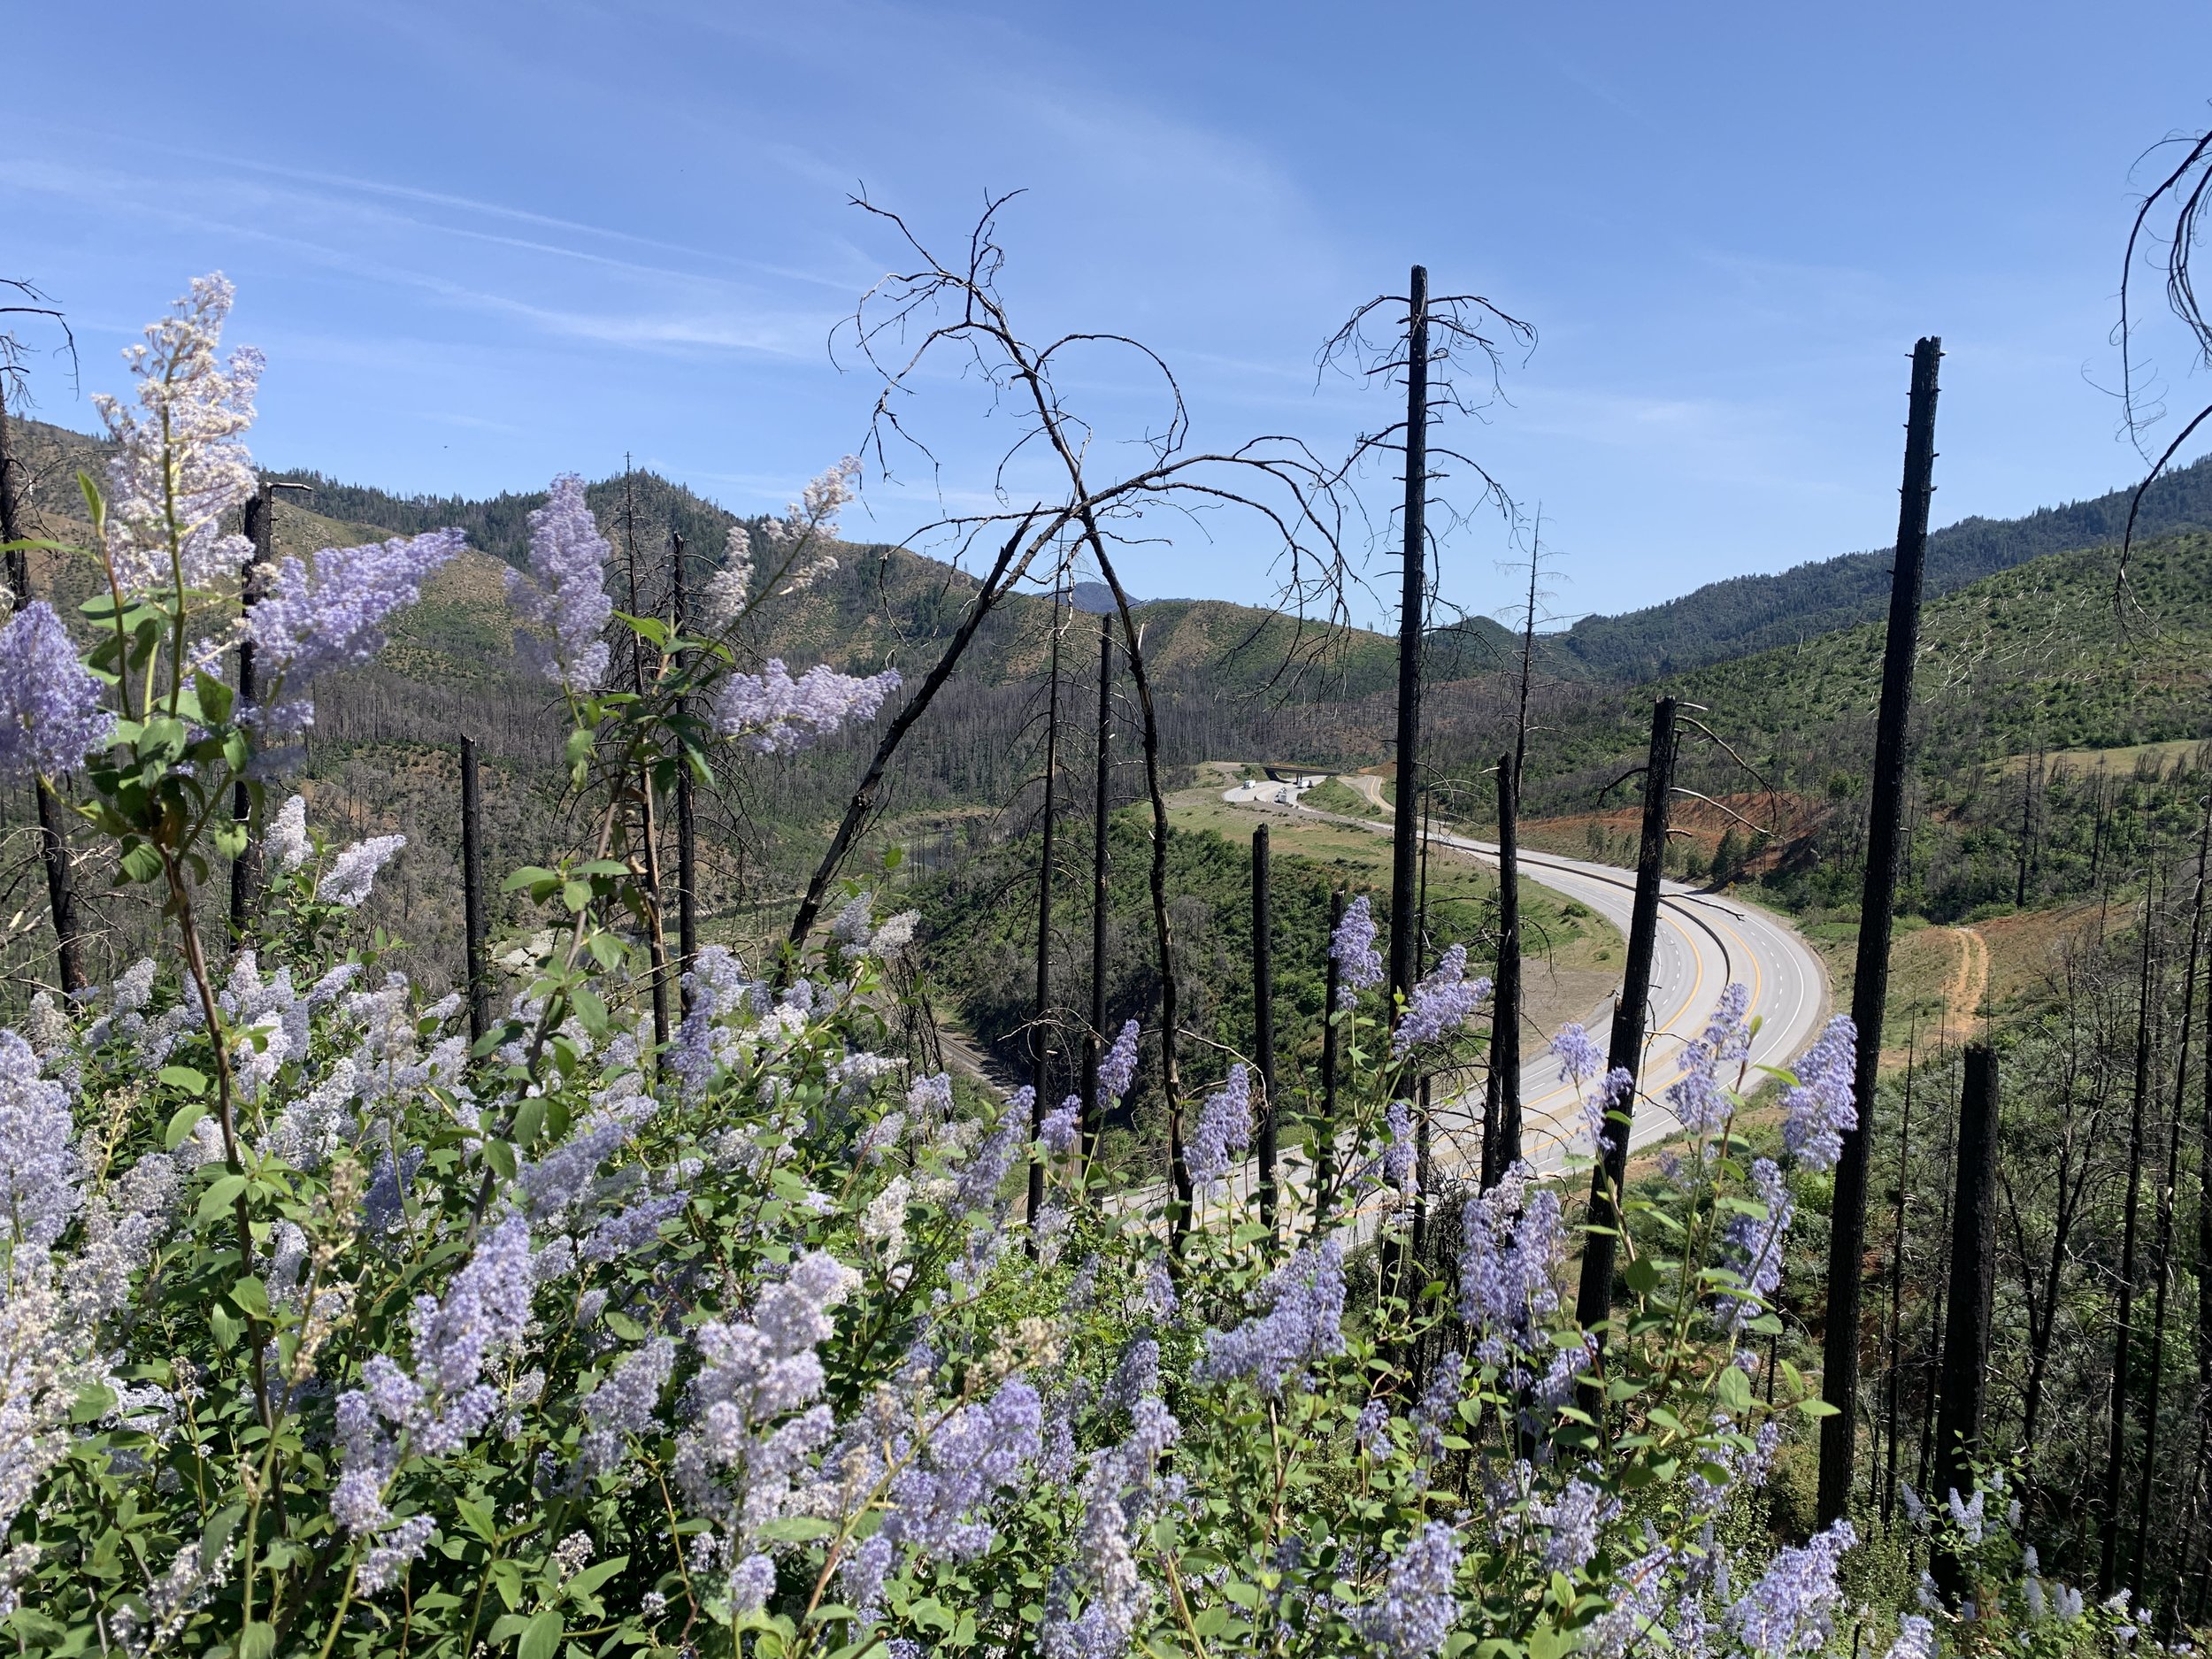  Our visit also coincided with native Ceanothus blooms. Viewing the I-5 from adjacent forest roads allowed us to gain perspective on how the Interstate impacts the landscape. 